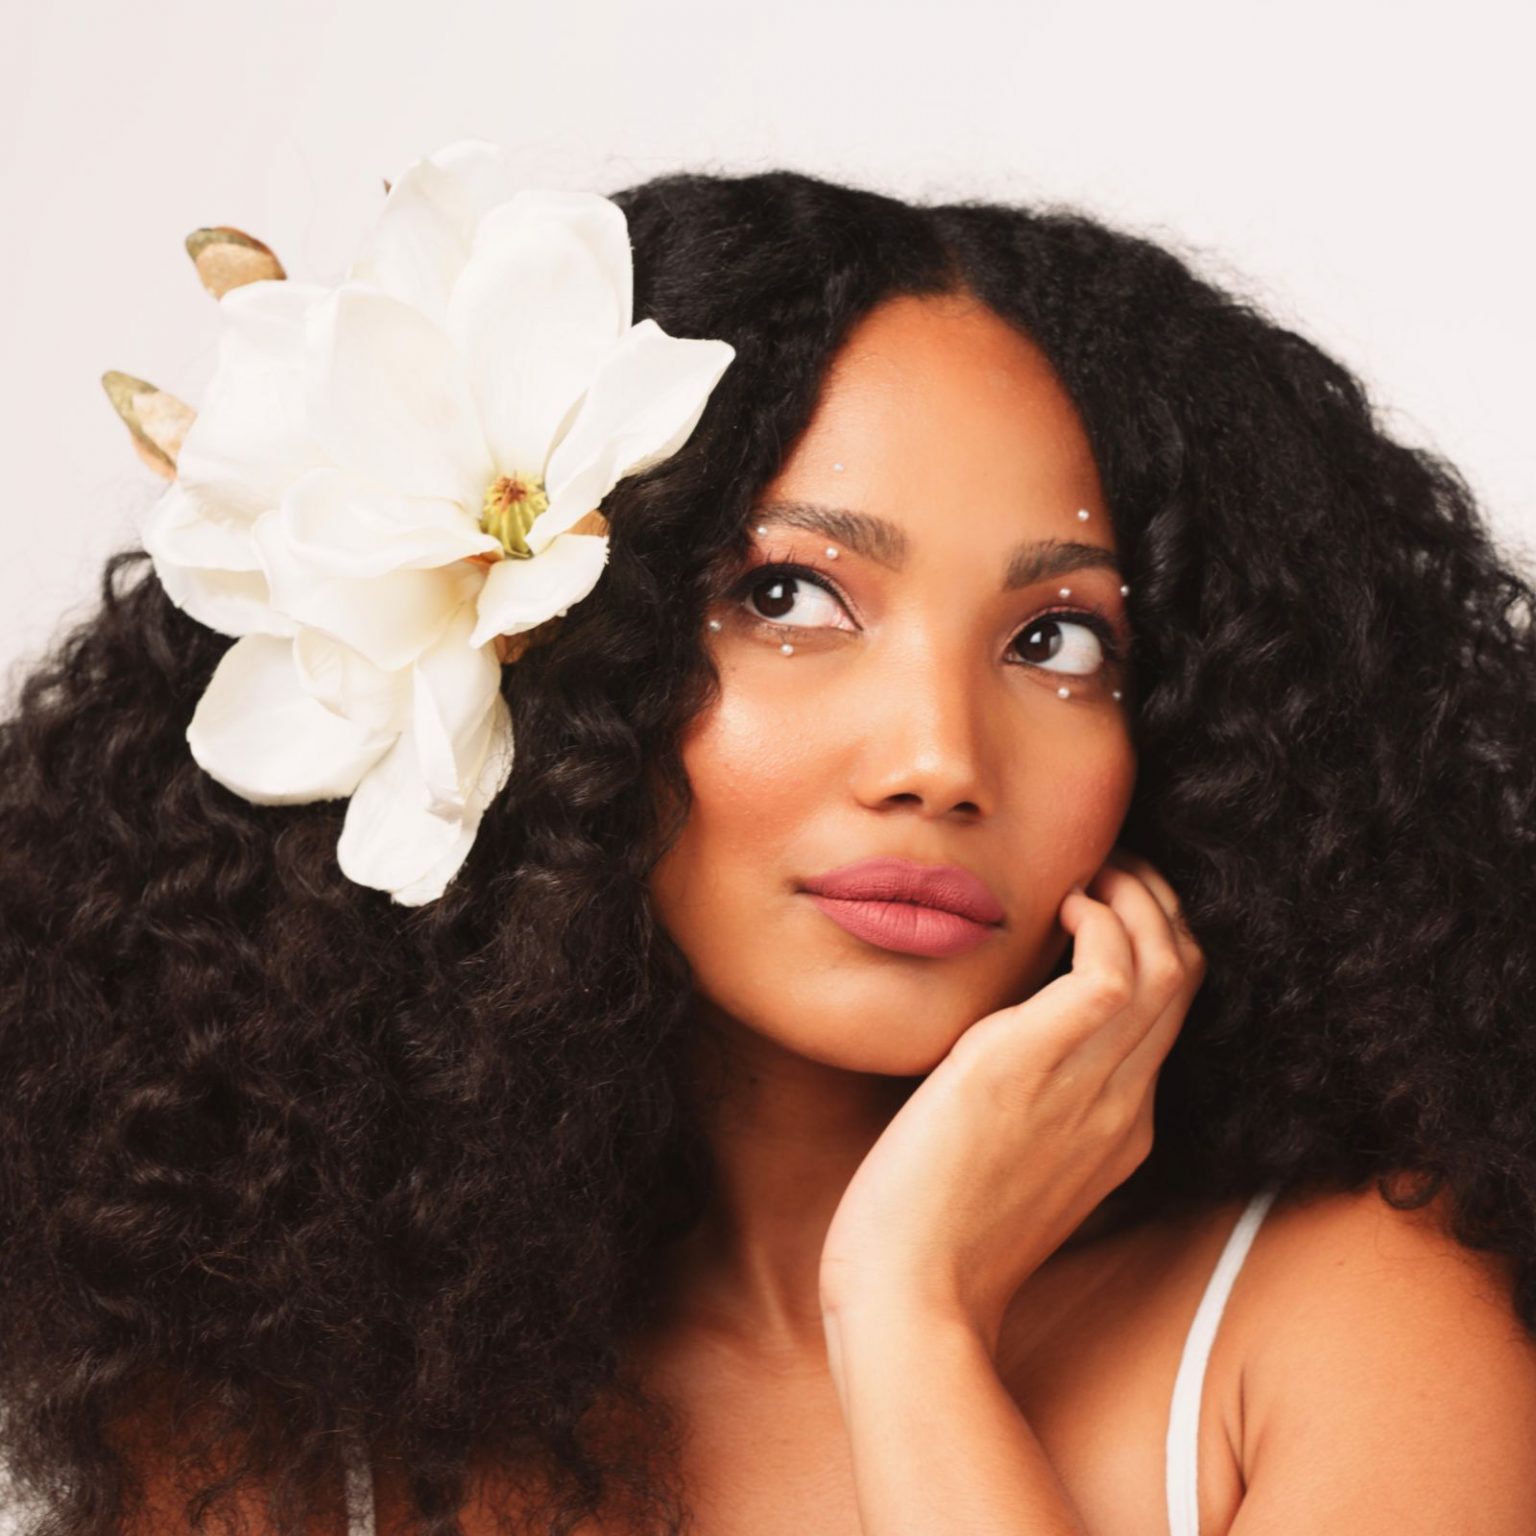 Woman With Black Curly Hair With A White Flower In It Posing For The Camera